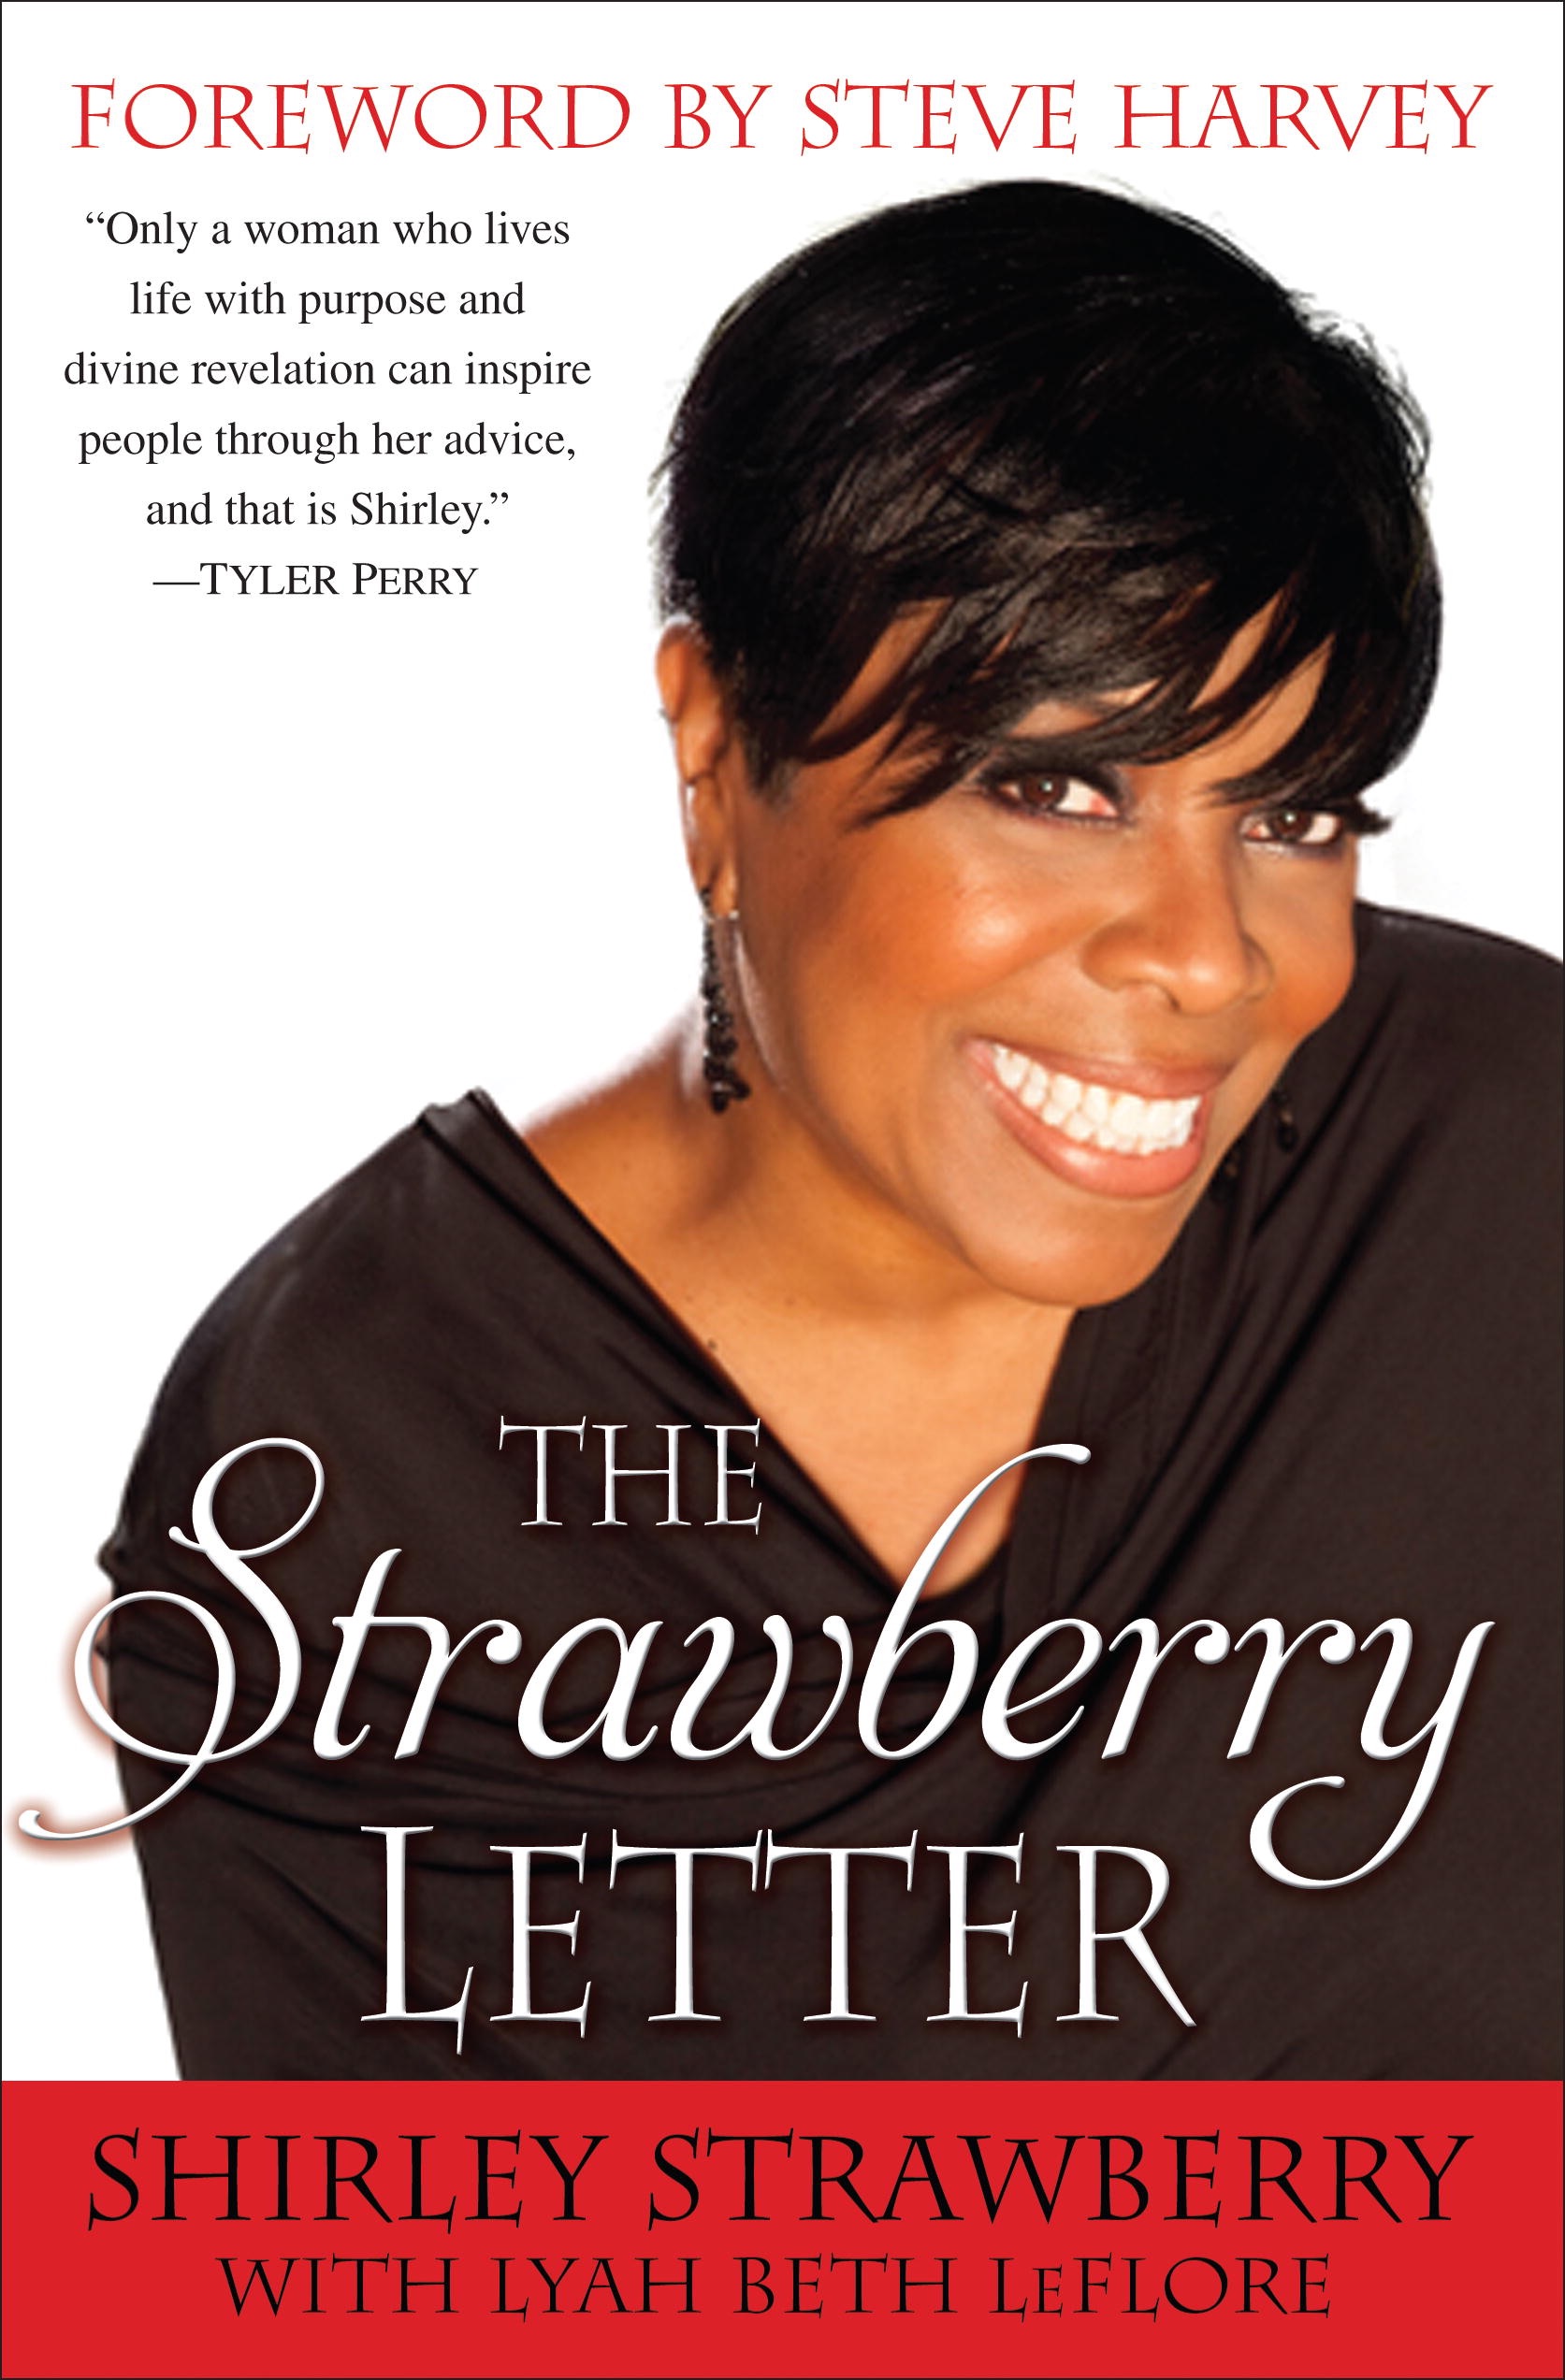 The Strawberry Letter by Shirley Strawberry on iBooks